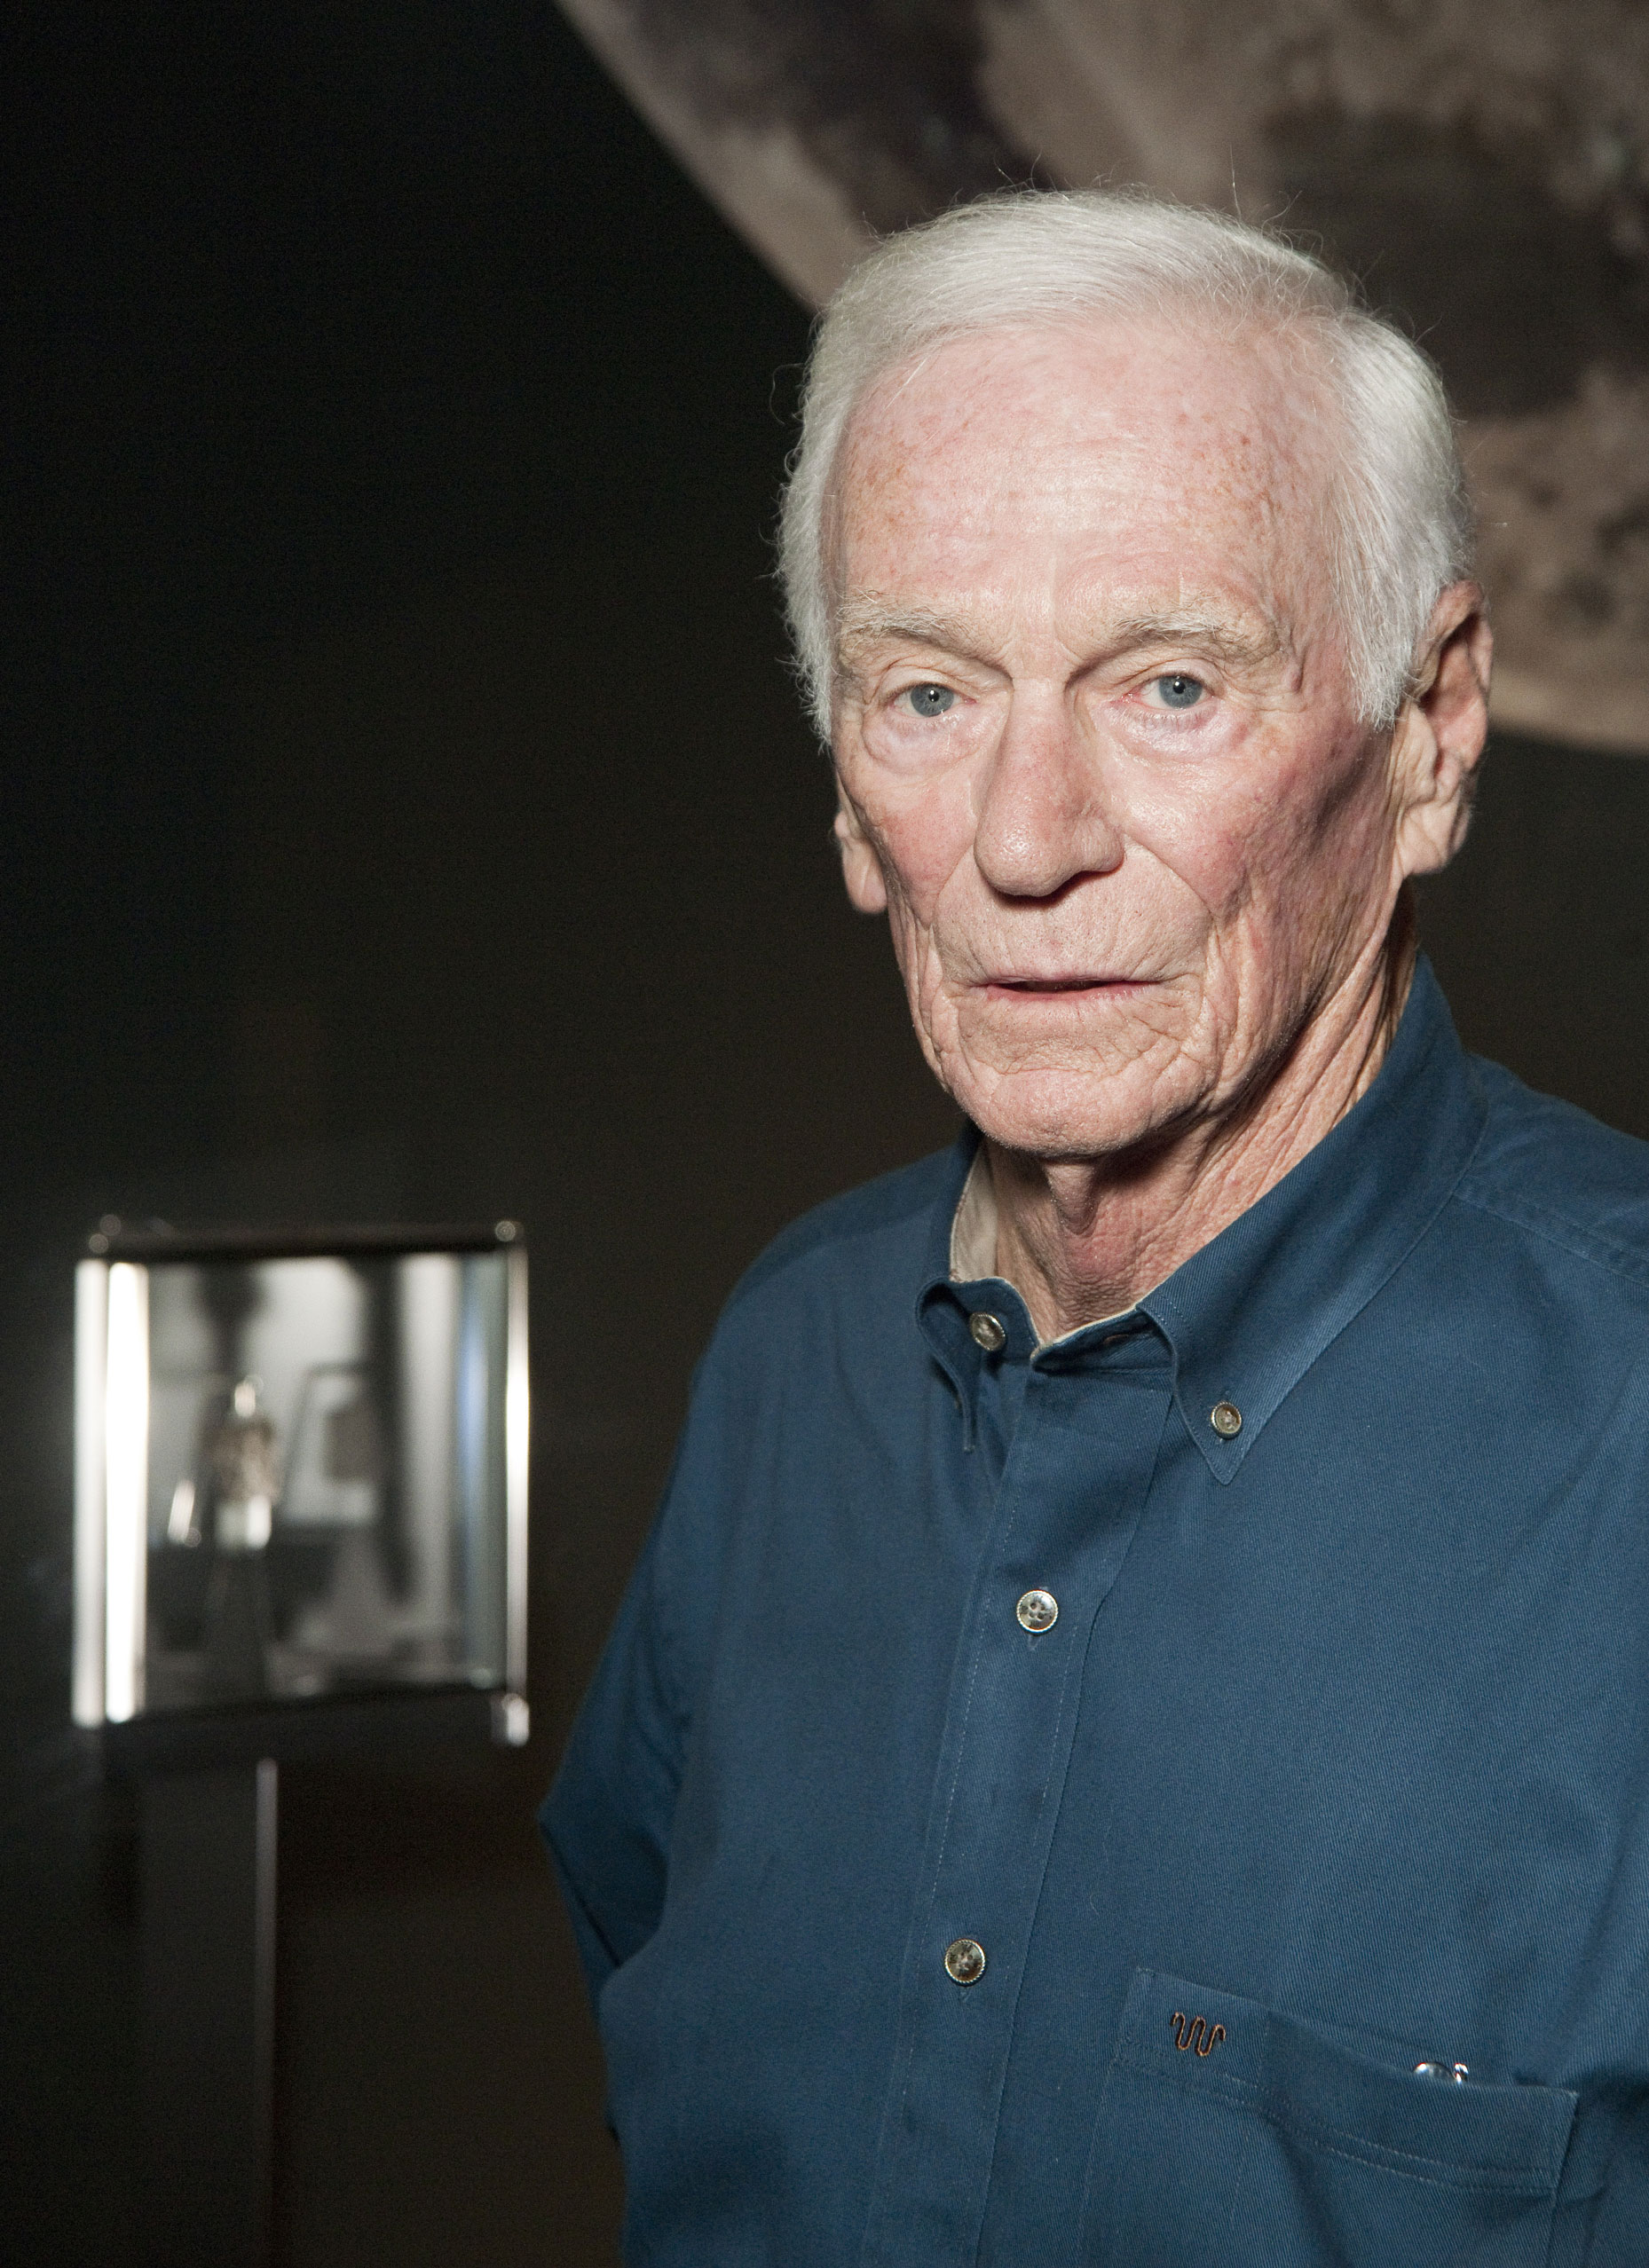 Commander Gene Cernan, pictured in our Exploring Space gallery